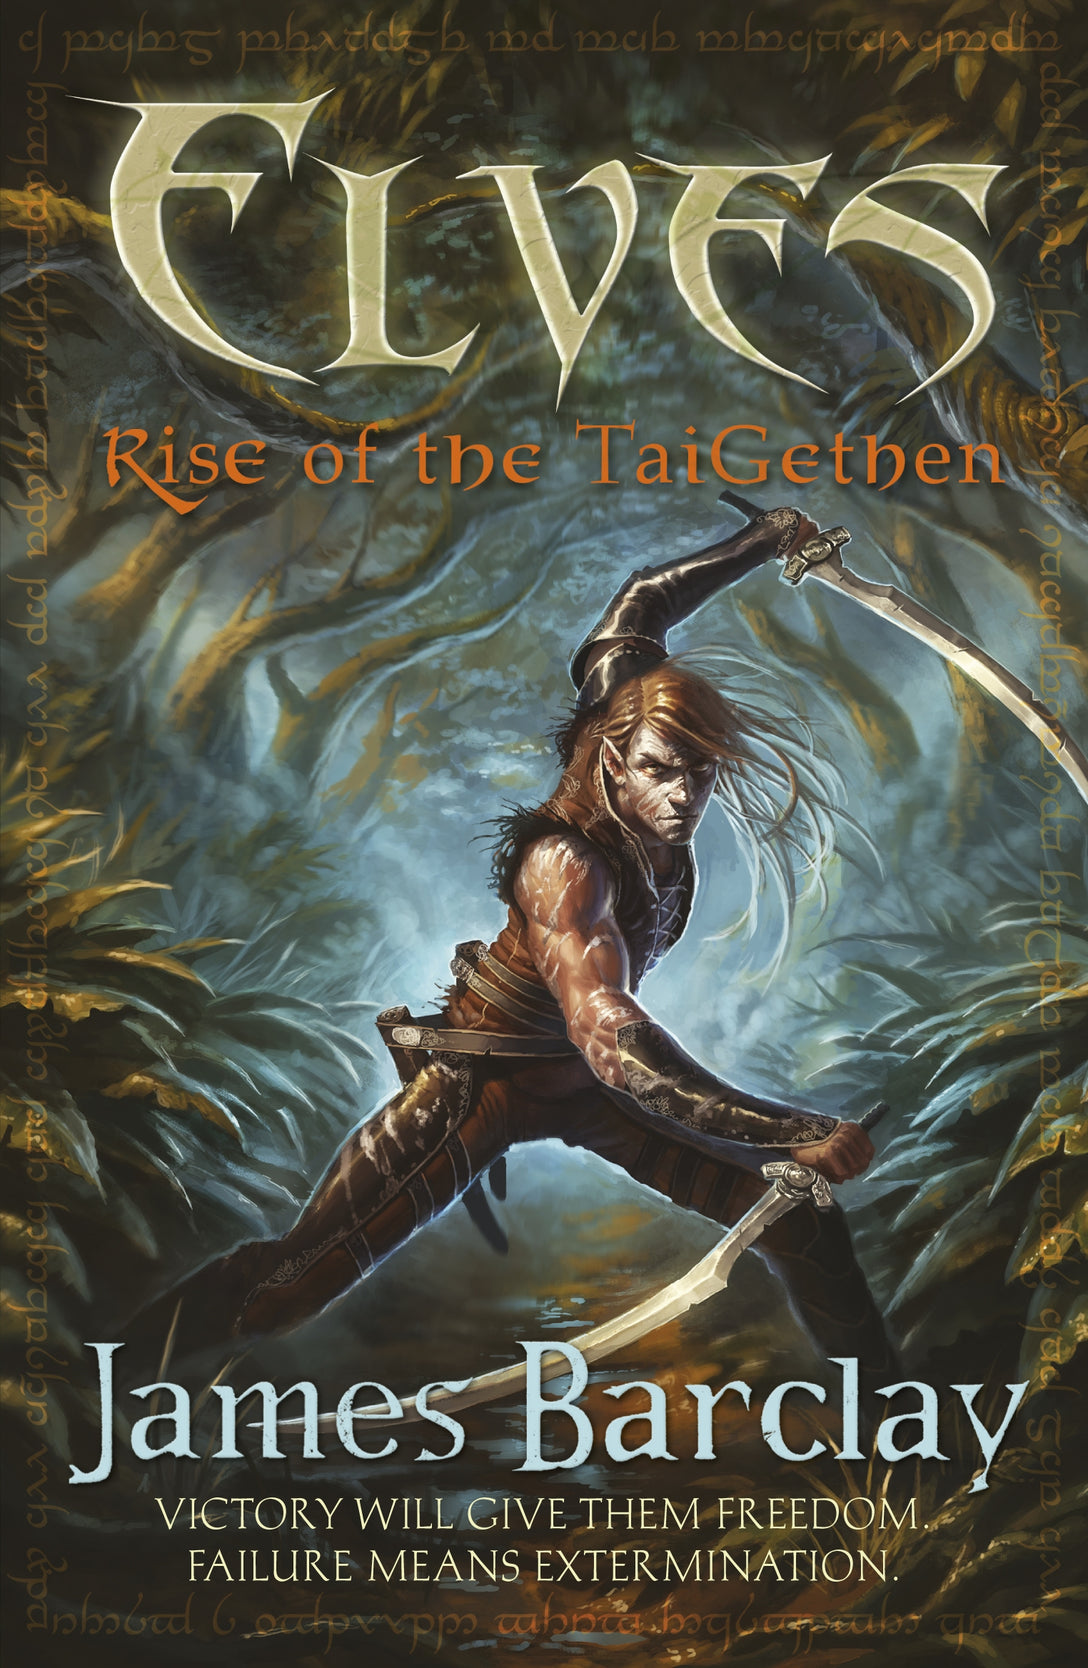 Elves: Rise of the TaiGethen by James Barclay